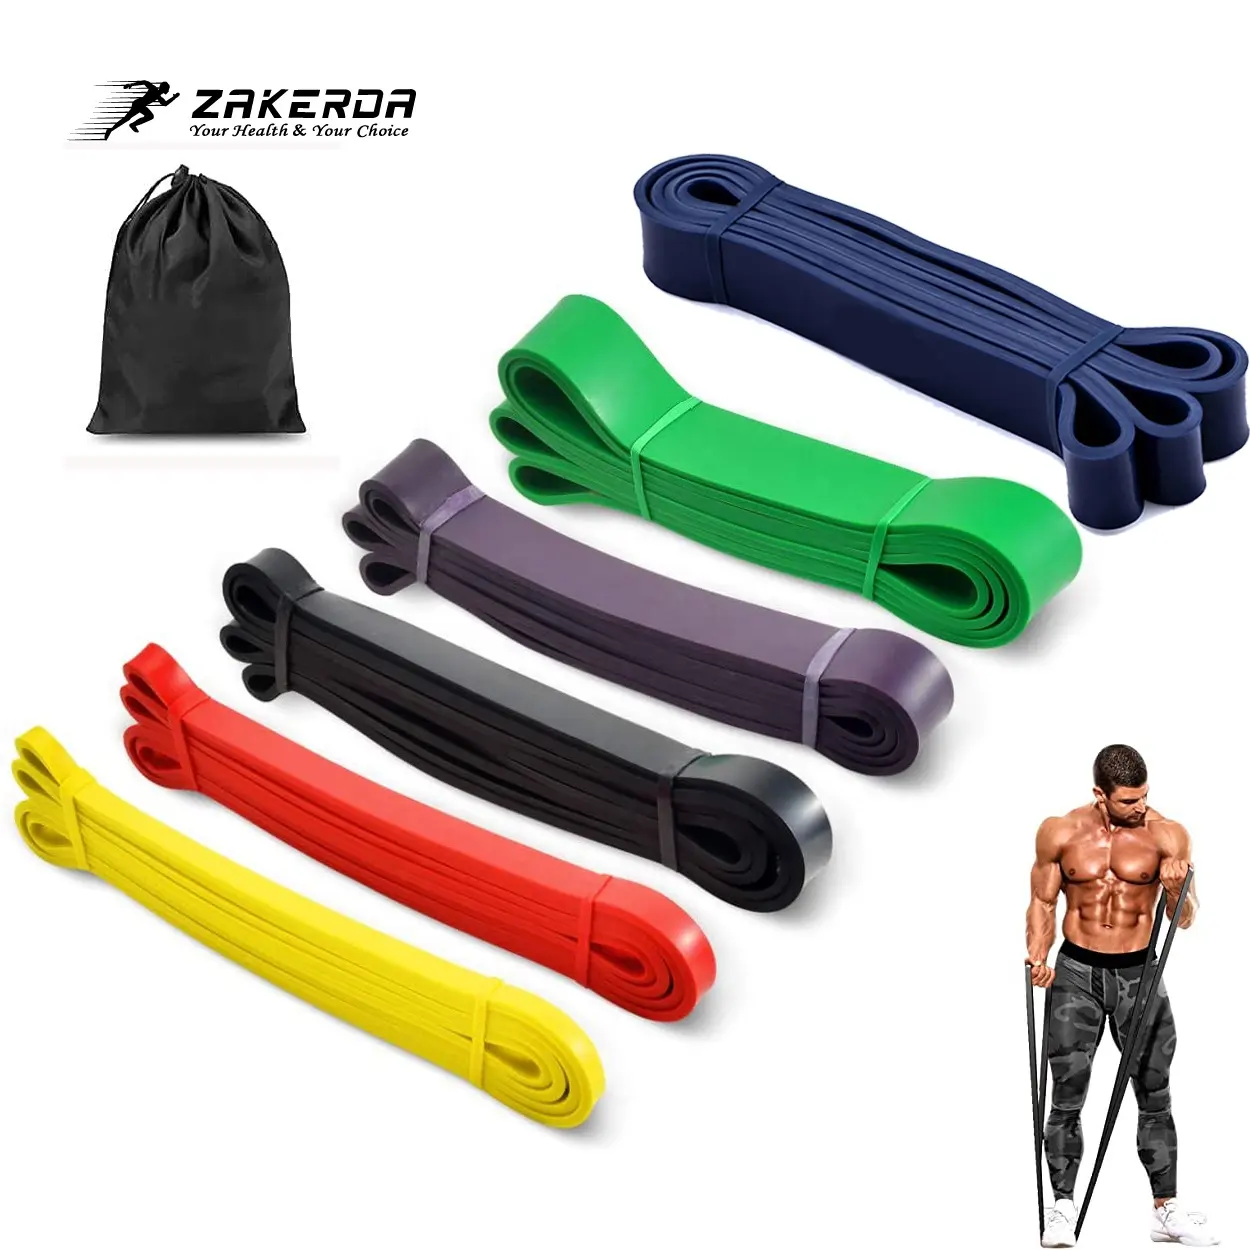 Zakerda Wholesale latex pull up assist heavy resistance bands set gym fitness exercise band set strength training workout home